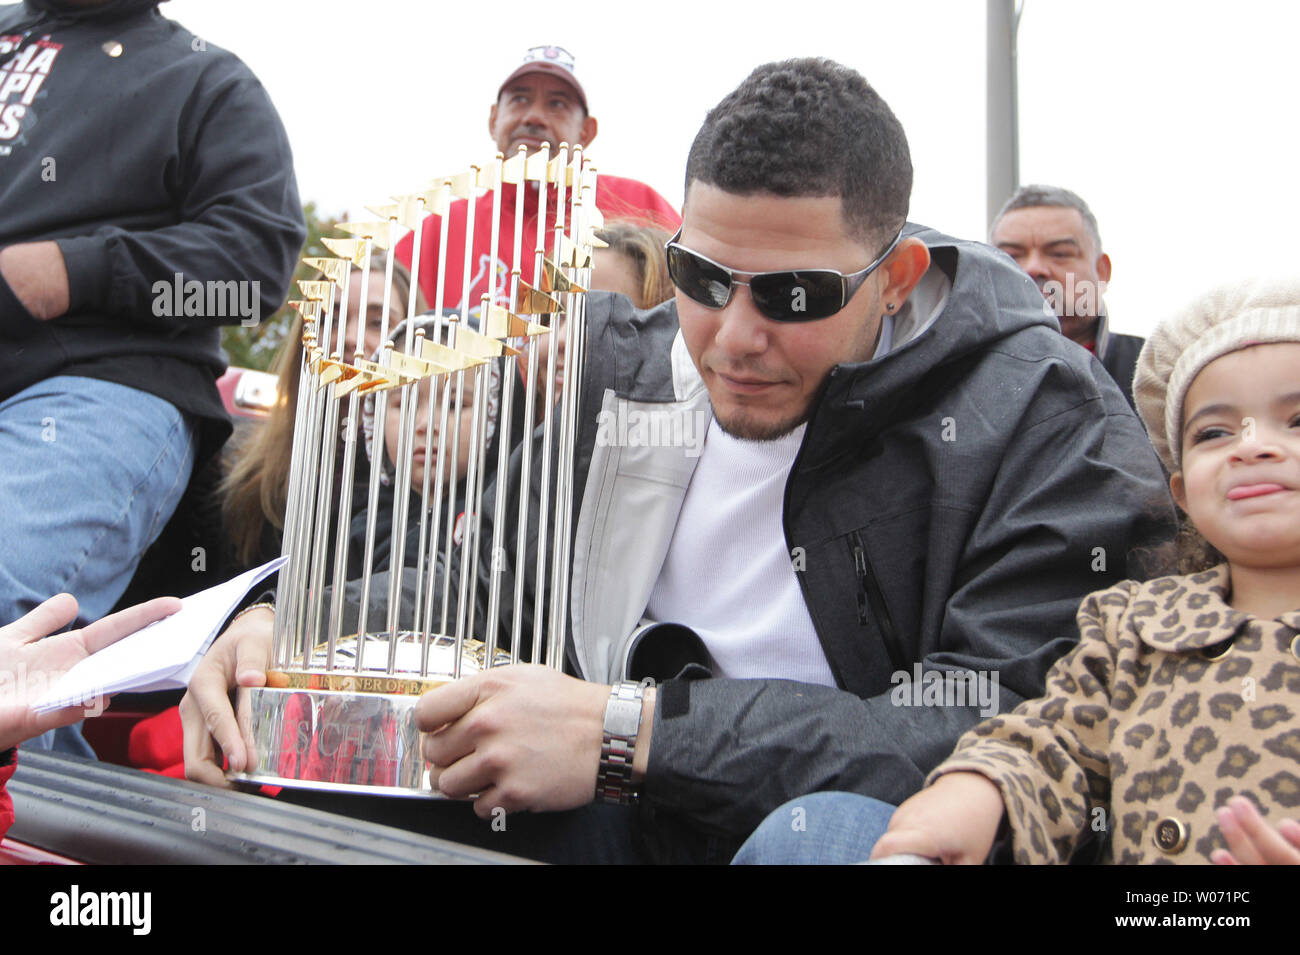 St. Louis Cardinals catcher Yadier Molina holds the World Series trophy  before a parade honoring the World Championship team that won the 2011 World  Series in St. Louis on October 30, 2011.